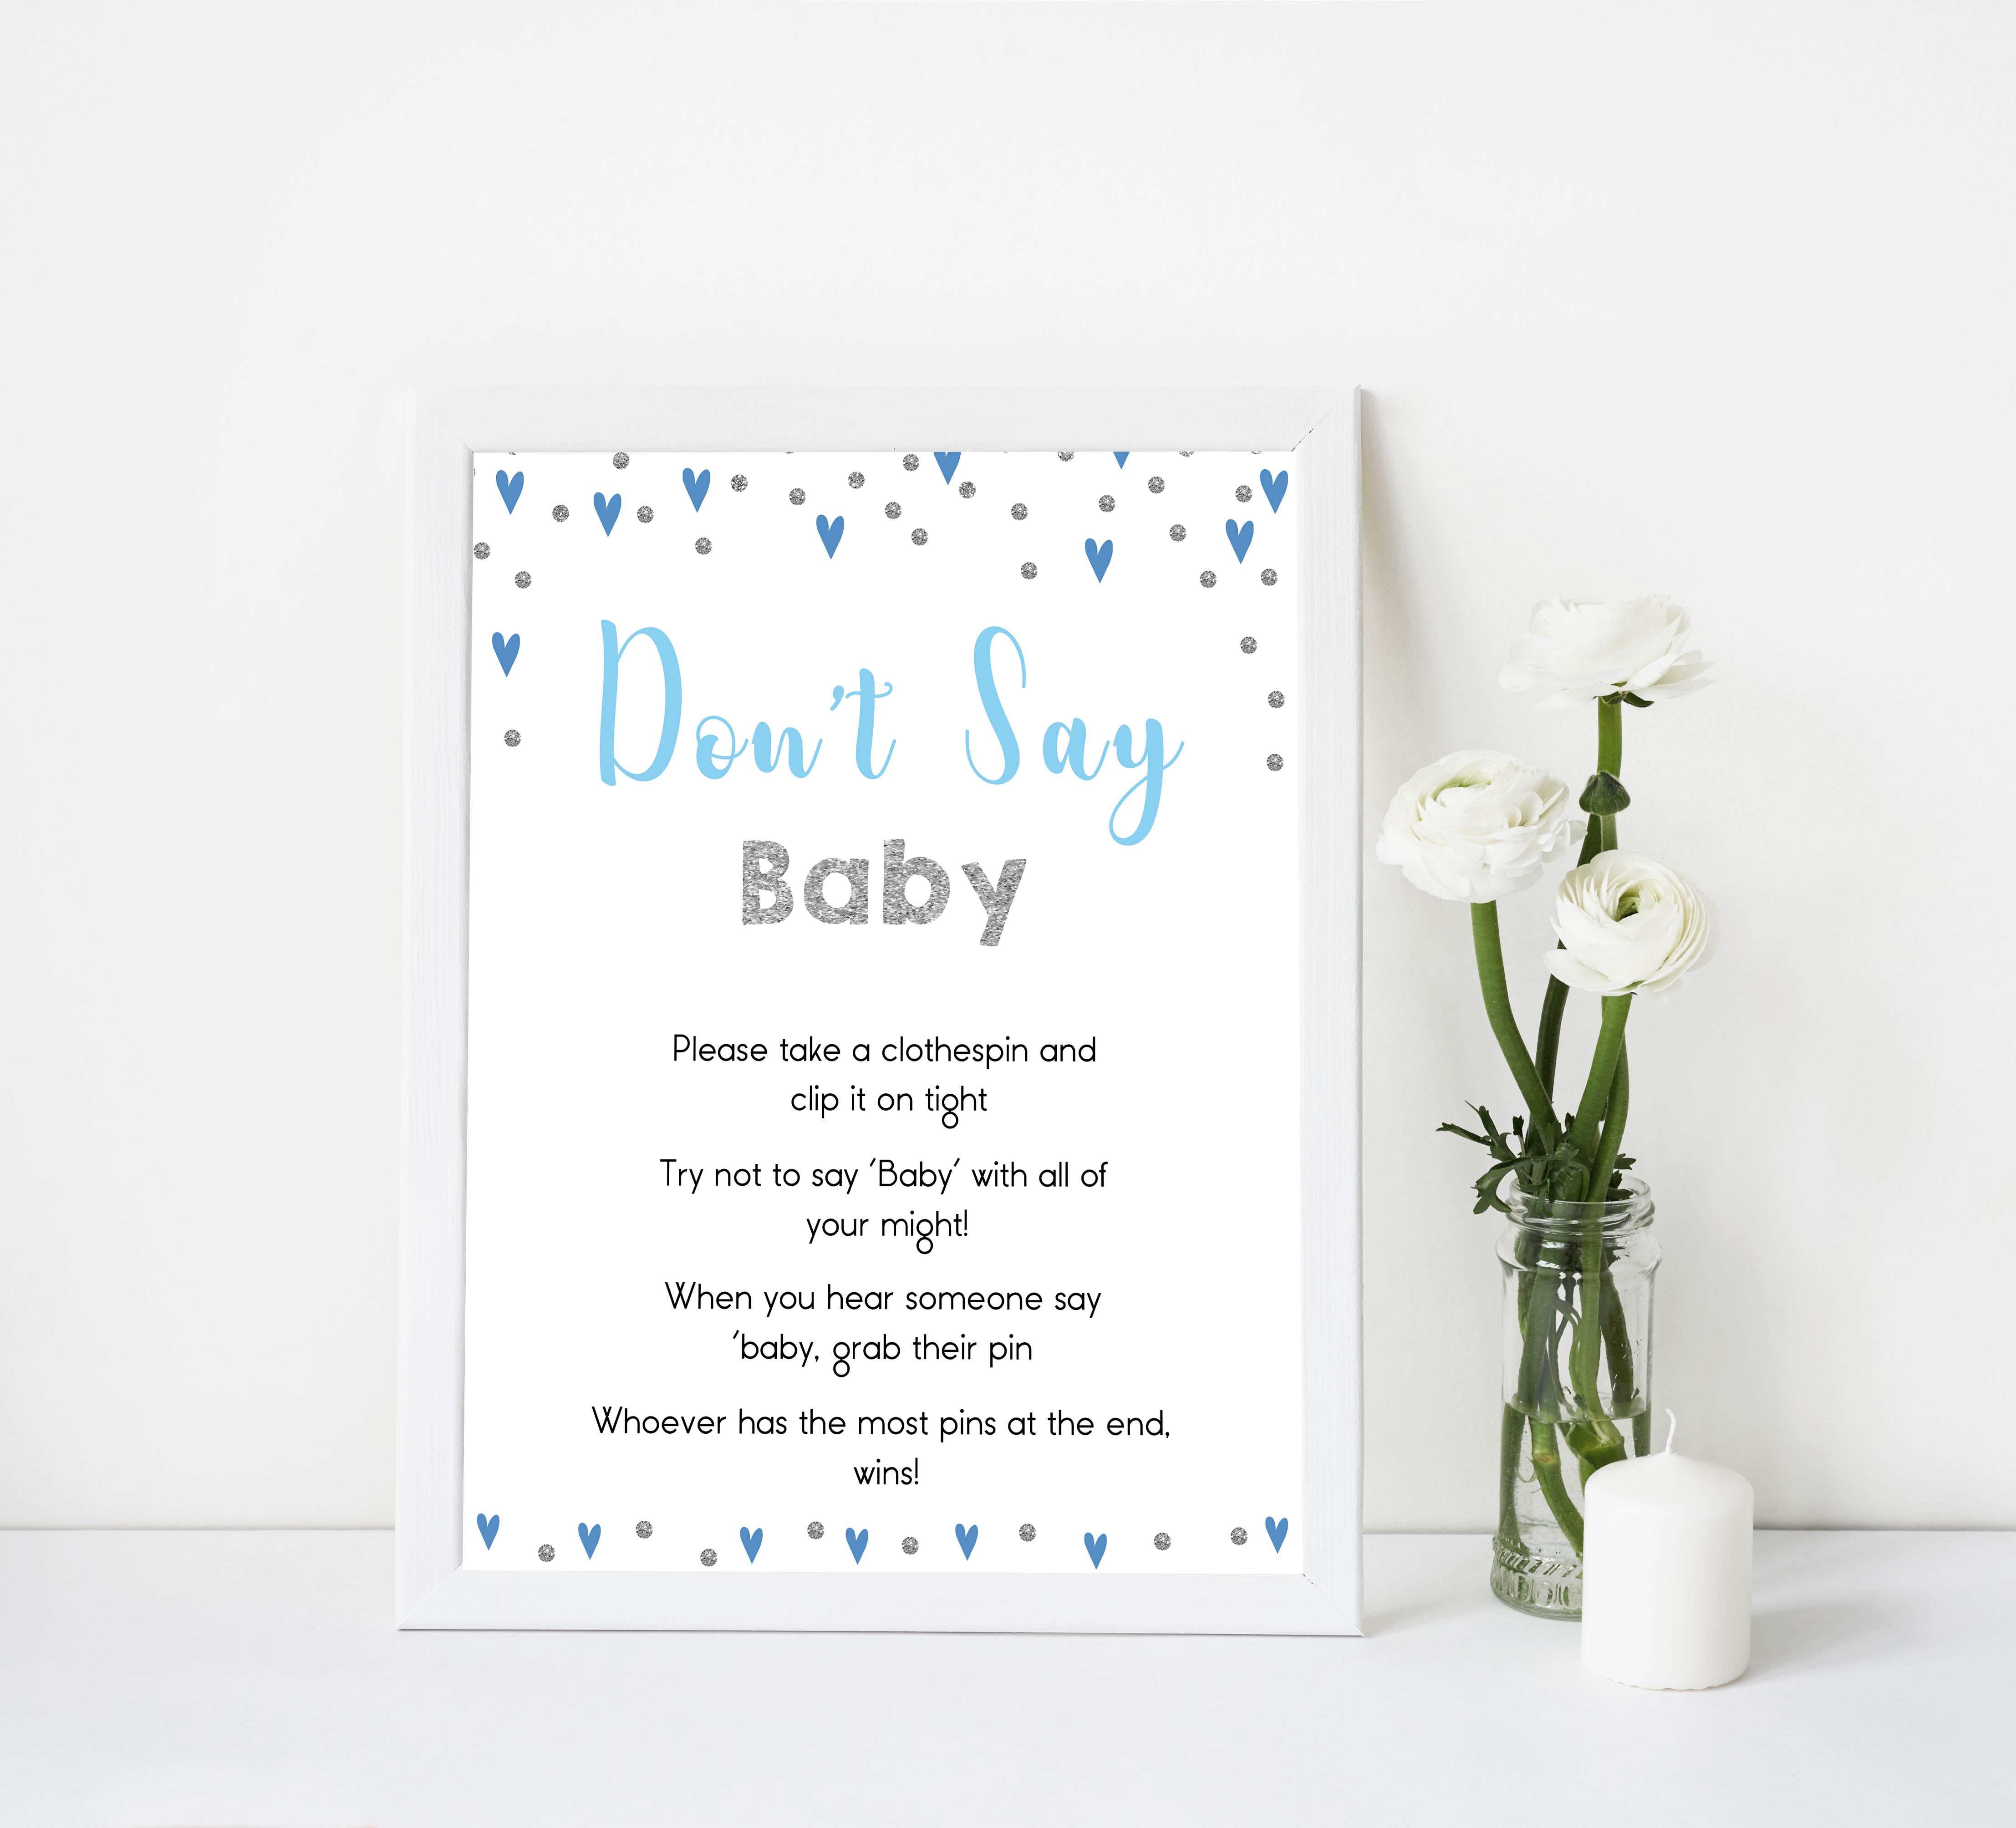 Don't say baby game, baby clothes pin game, Printable baby shower games, small blue hearts fun baby games, baby shower games, fun baby shower ideas, top baby shower ideas, silver baby shower, blue hearts baby shower ideas